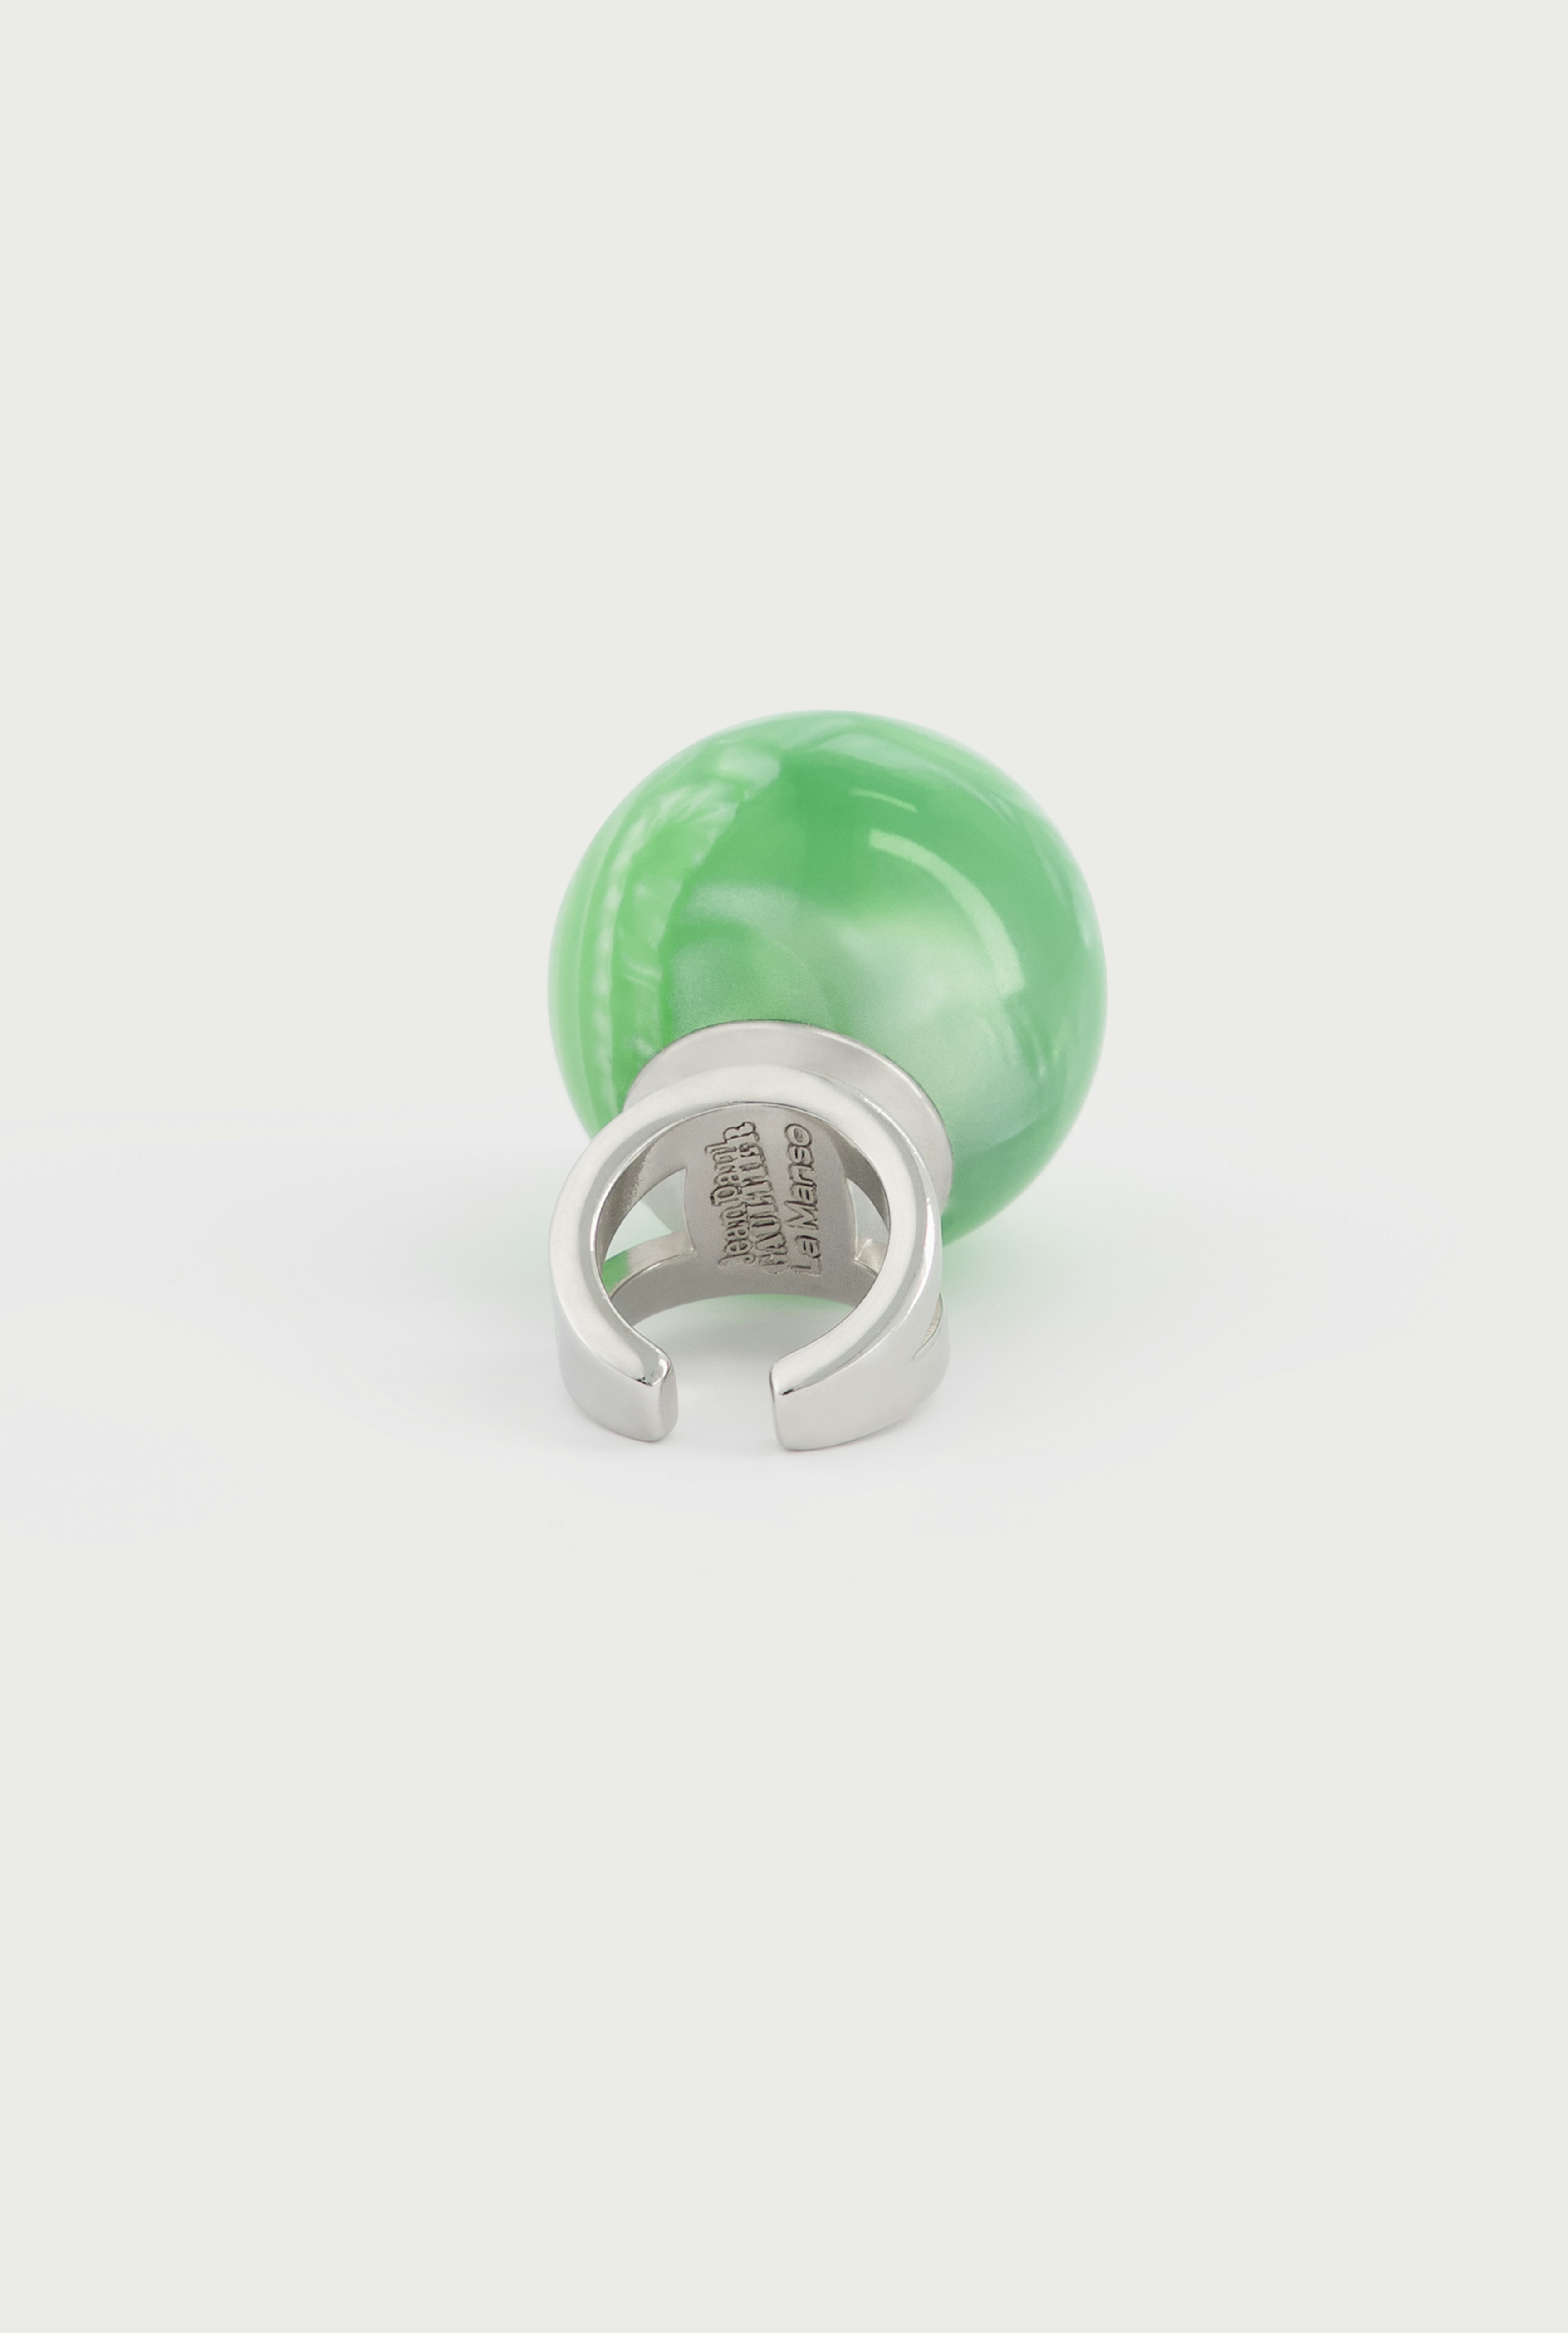 The Green Cyber Ball Ring